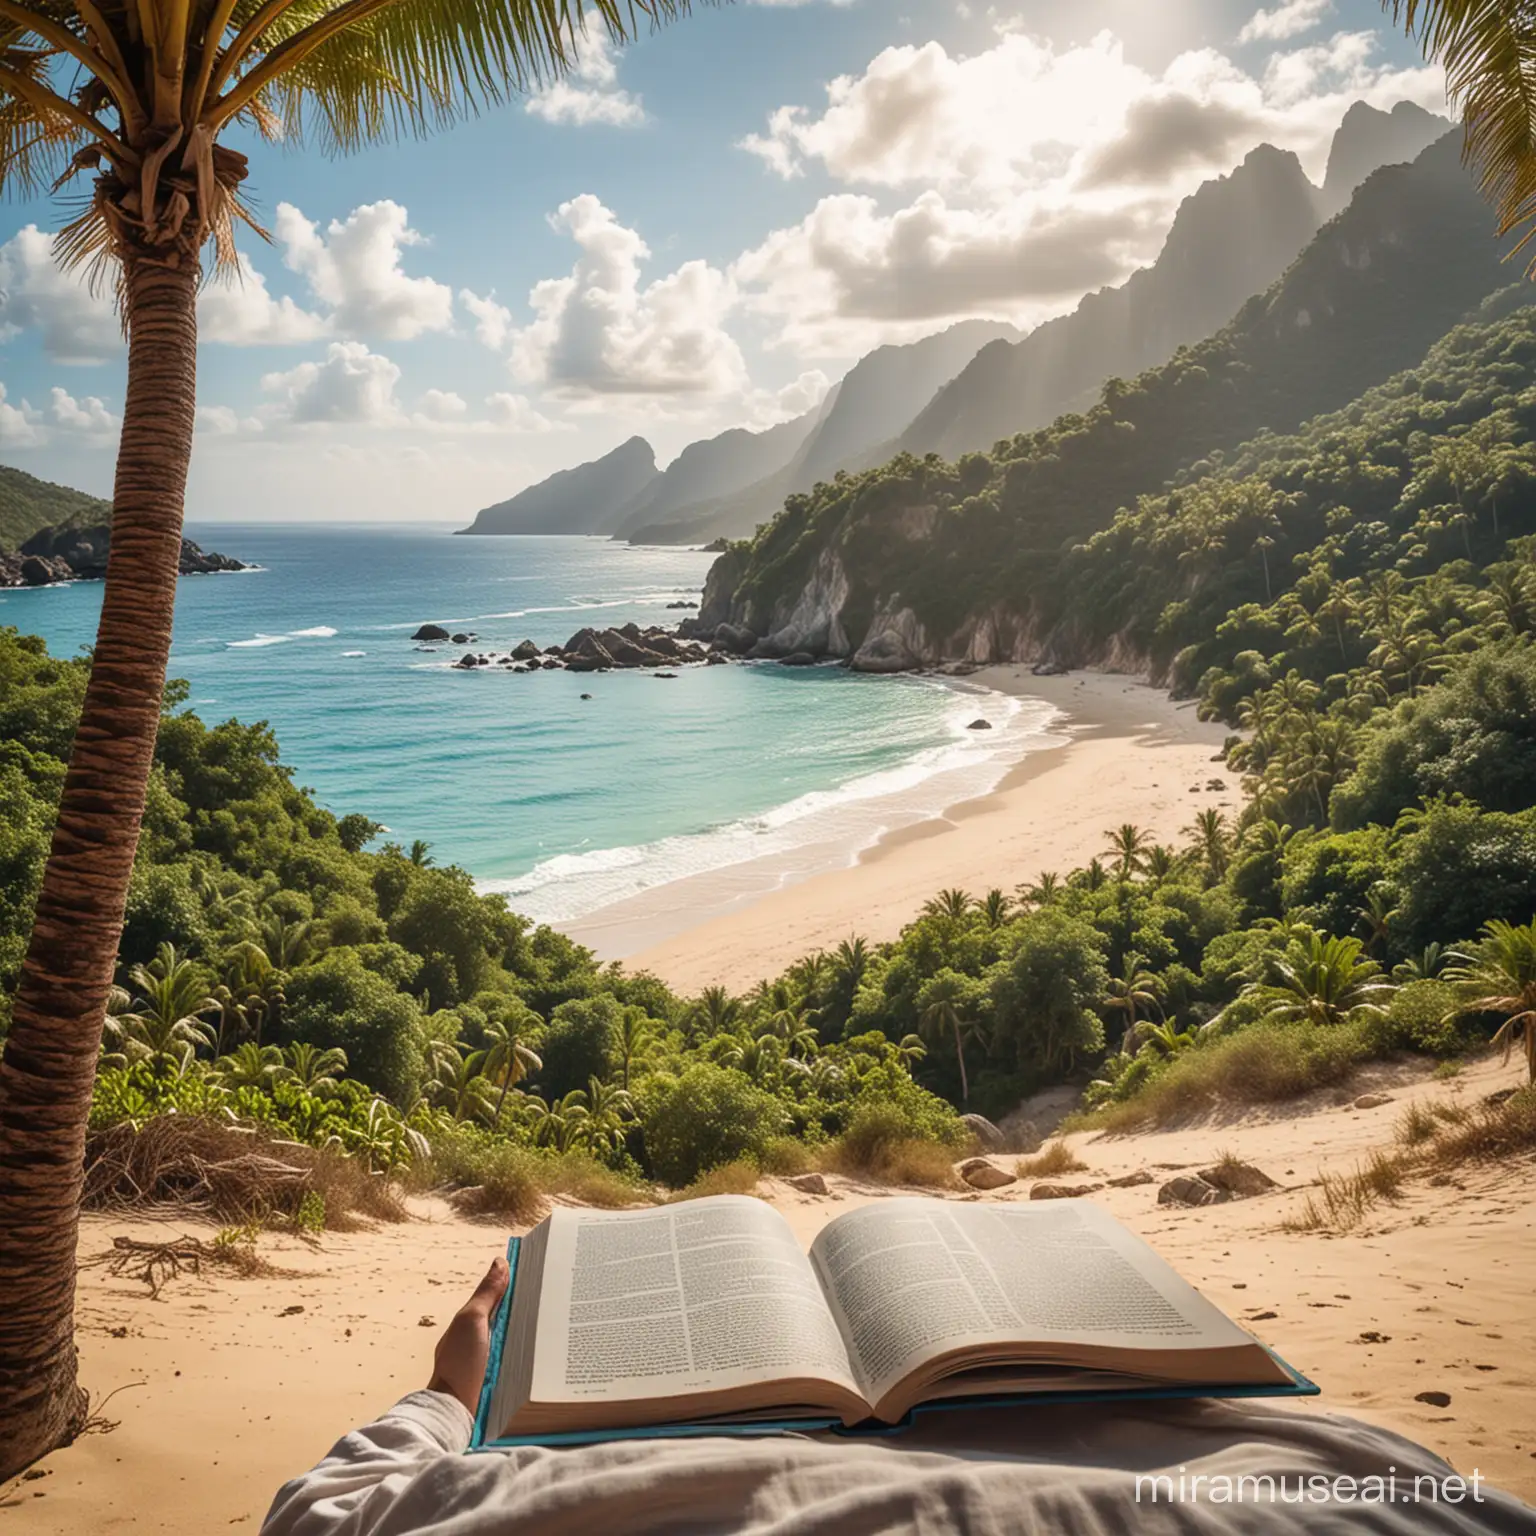 Solitude and Serenity Reading a Book in Exotic Paradise